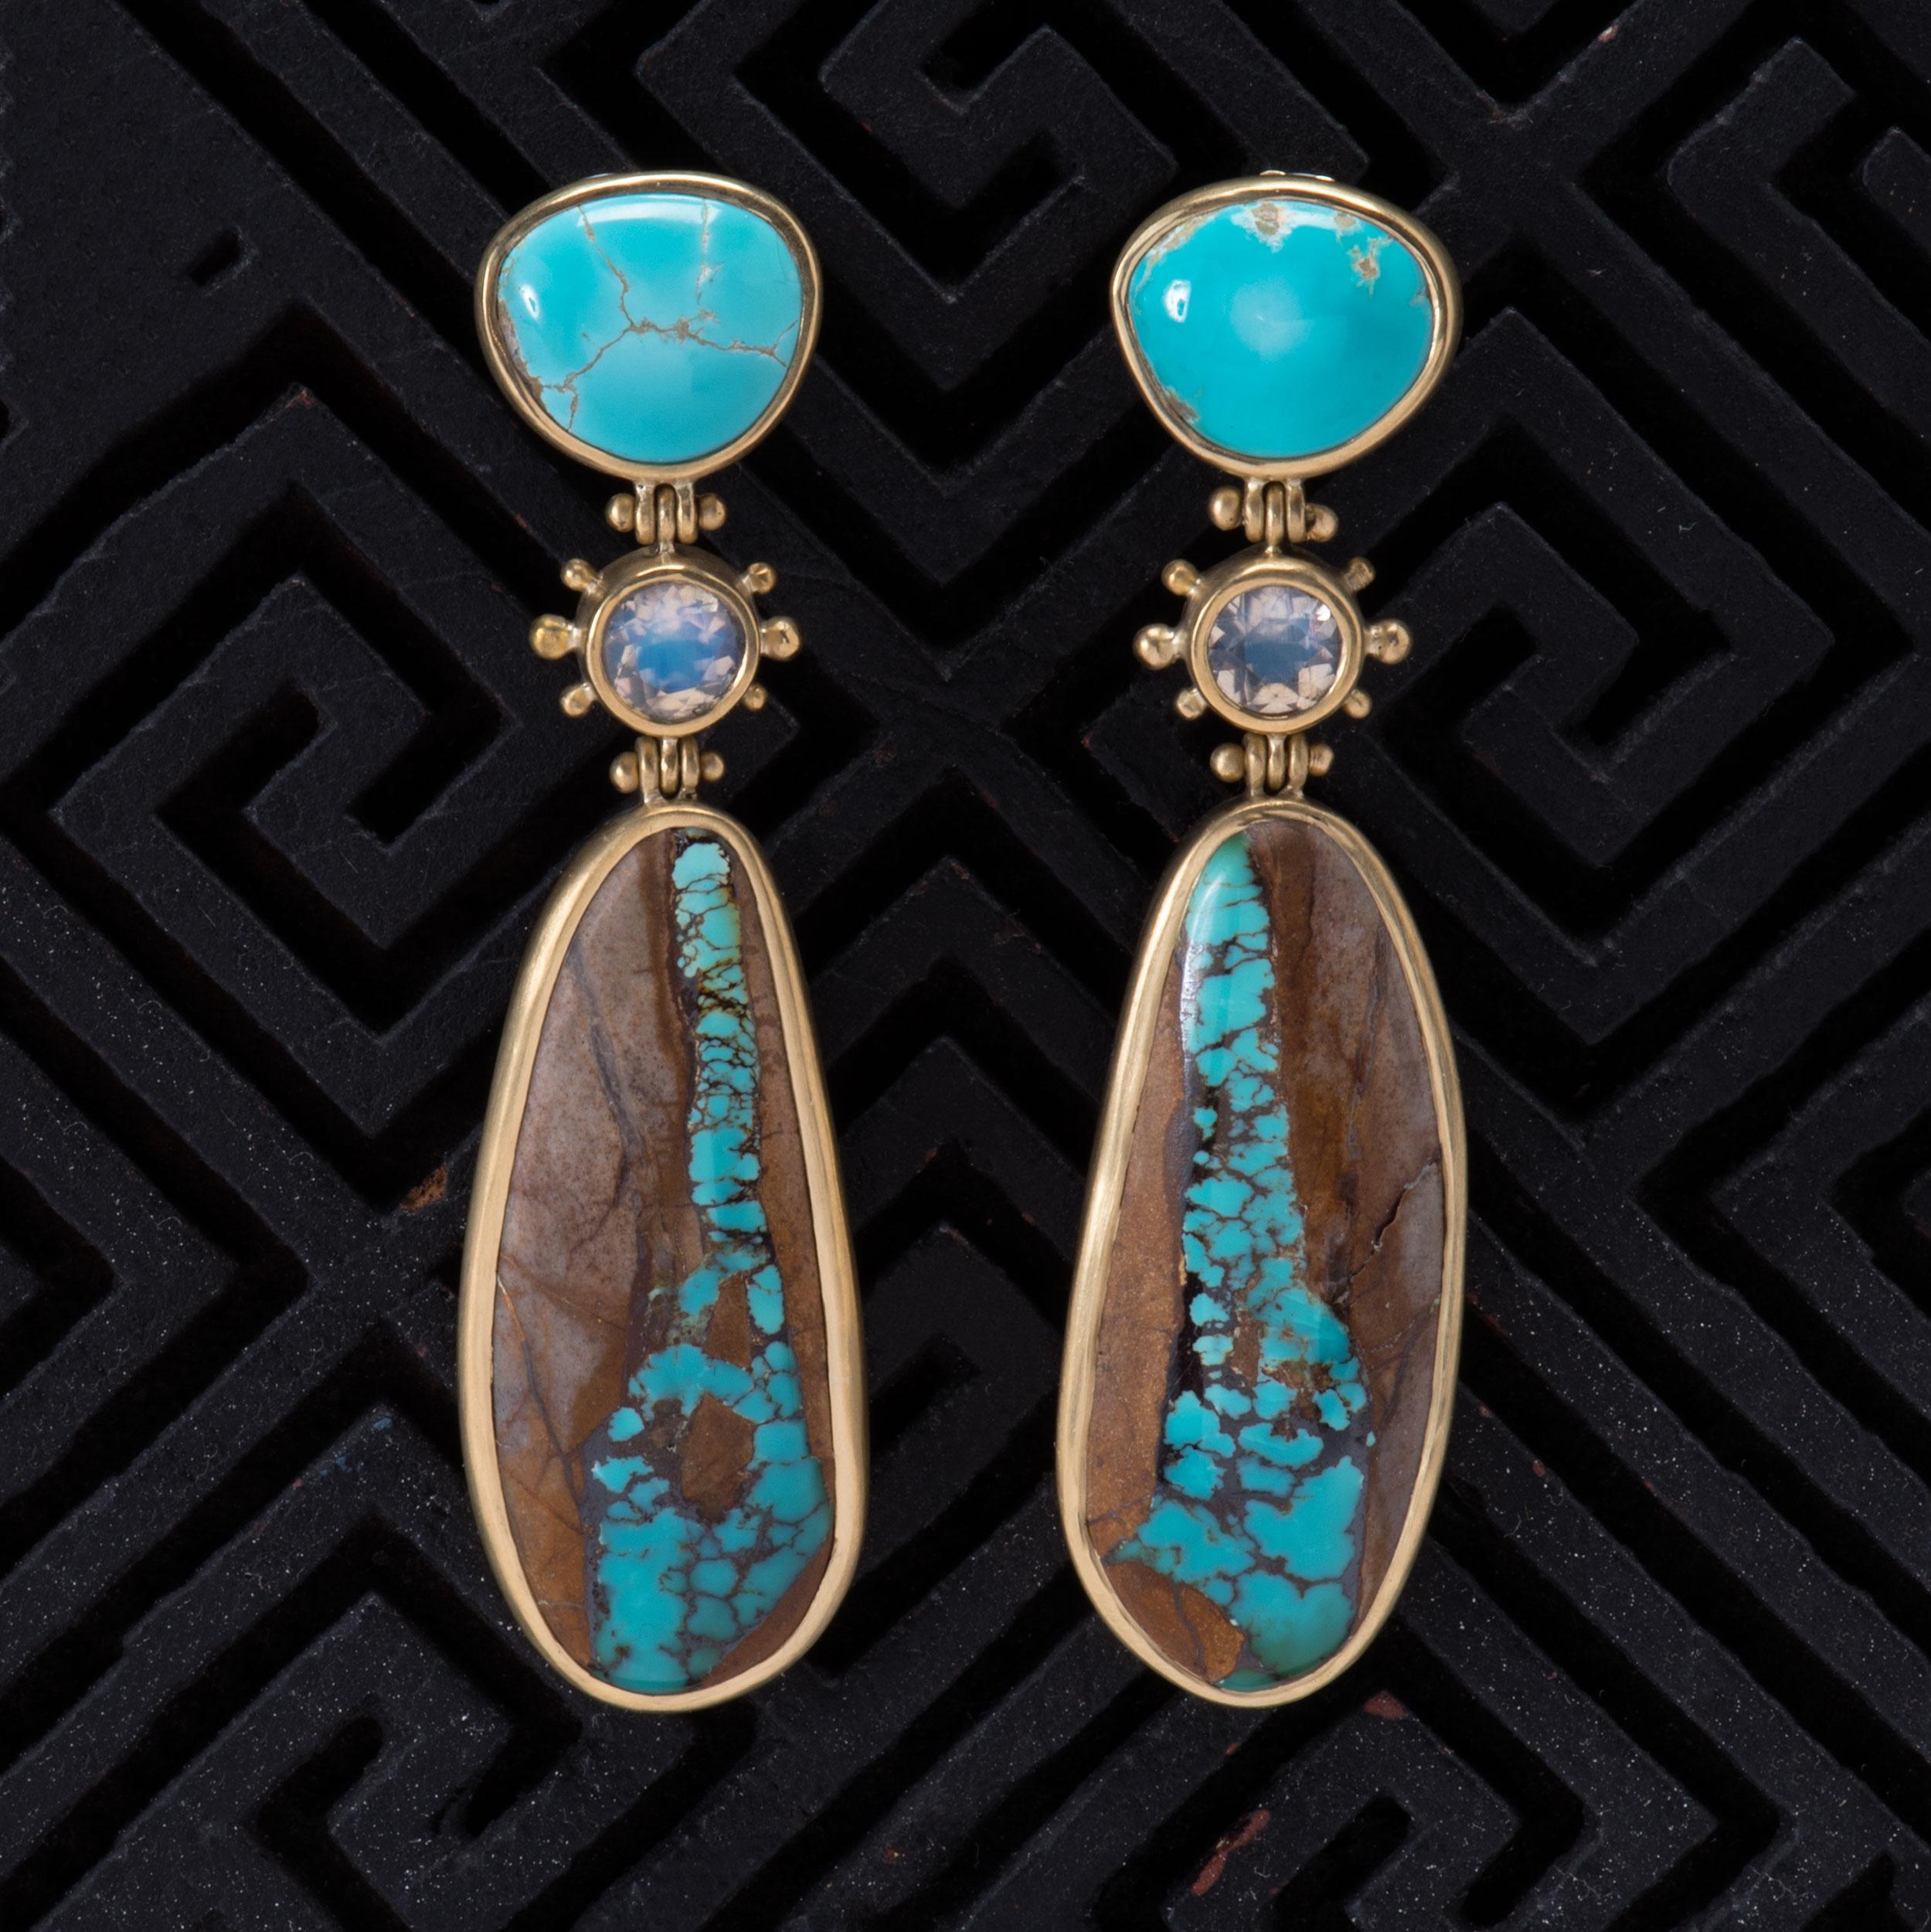 Blue Royston Turquoise Tops, faceted moonstones in beaded bezel settings and large brown matrix Royston cabochons are handcrafted with natural stones from Nevada and set in 18k gold. These Southwest style earrings are hinged above and below the